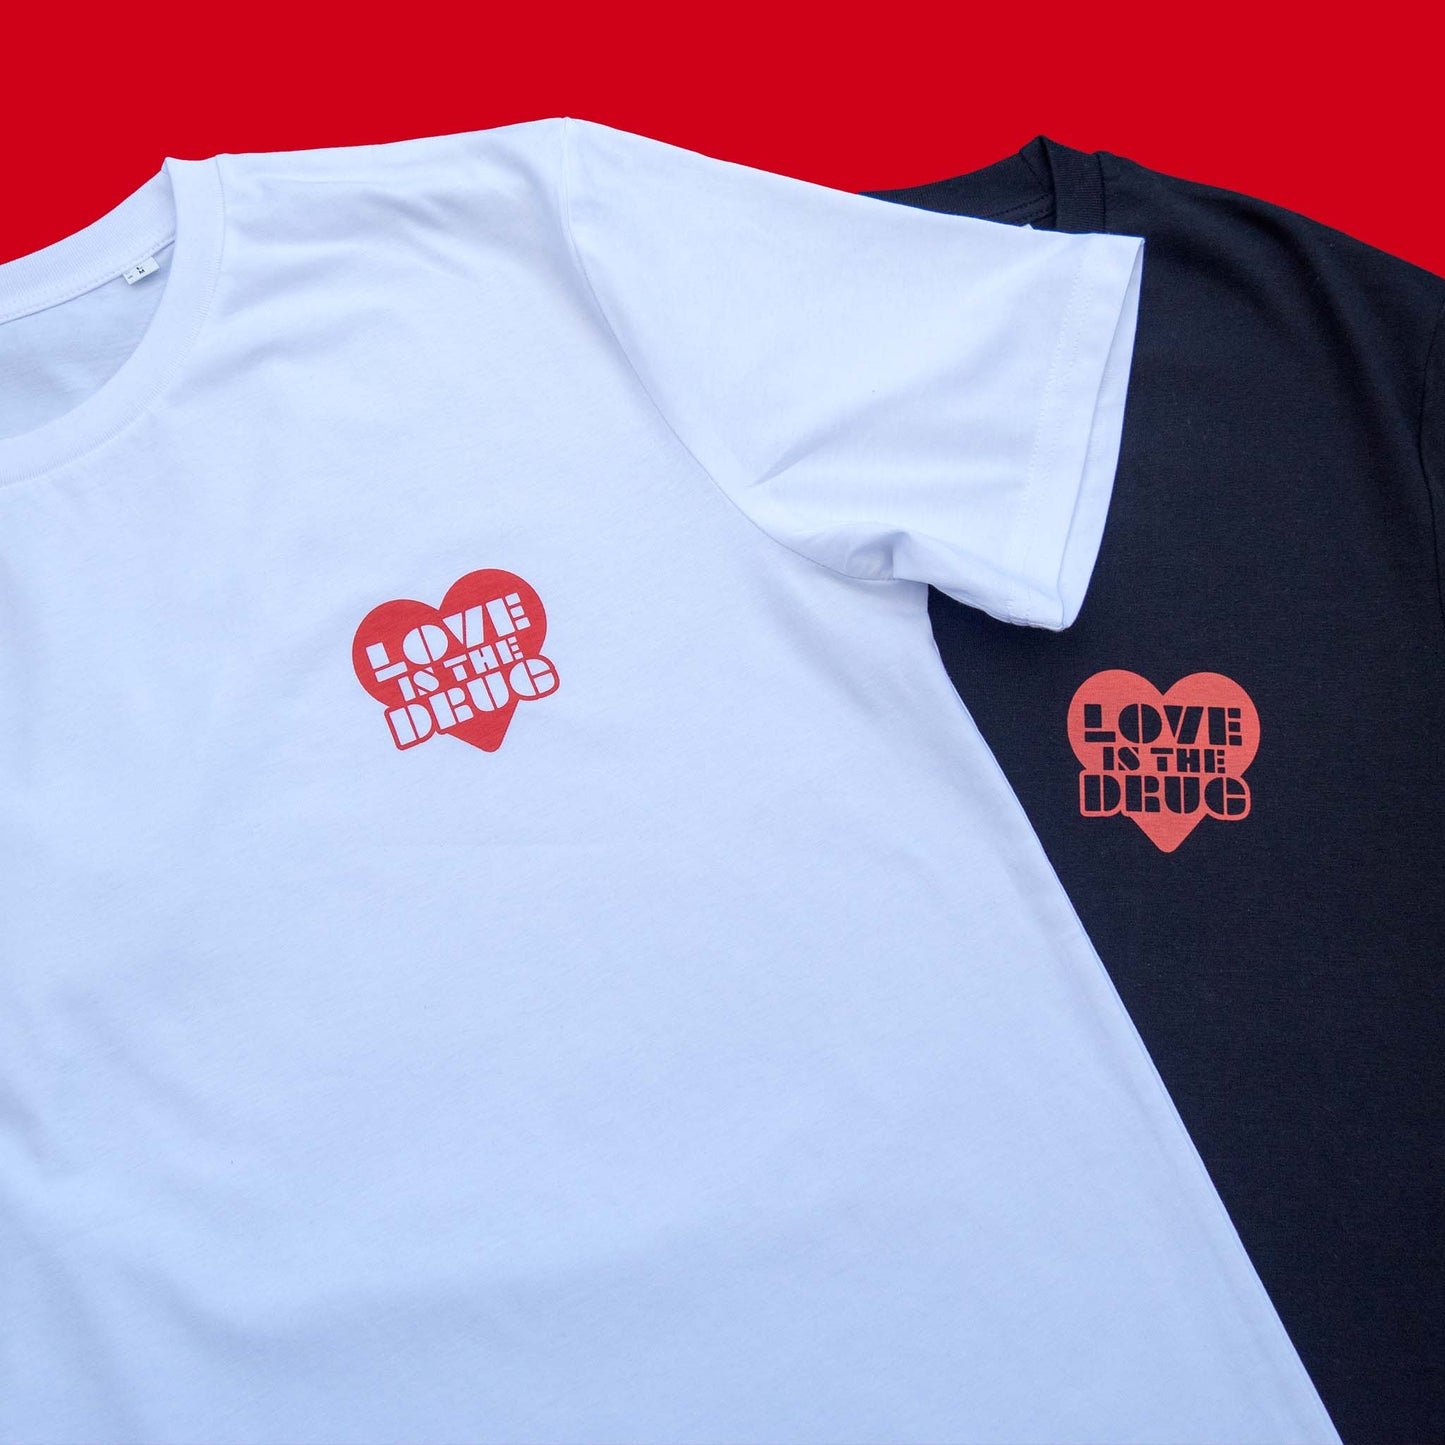 Red Love is the drug design on black or white t-shirt